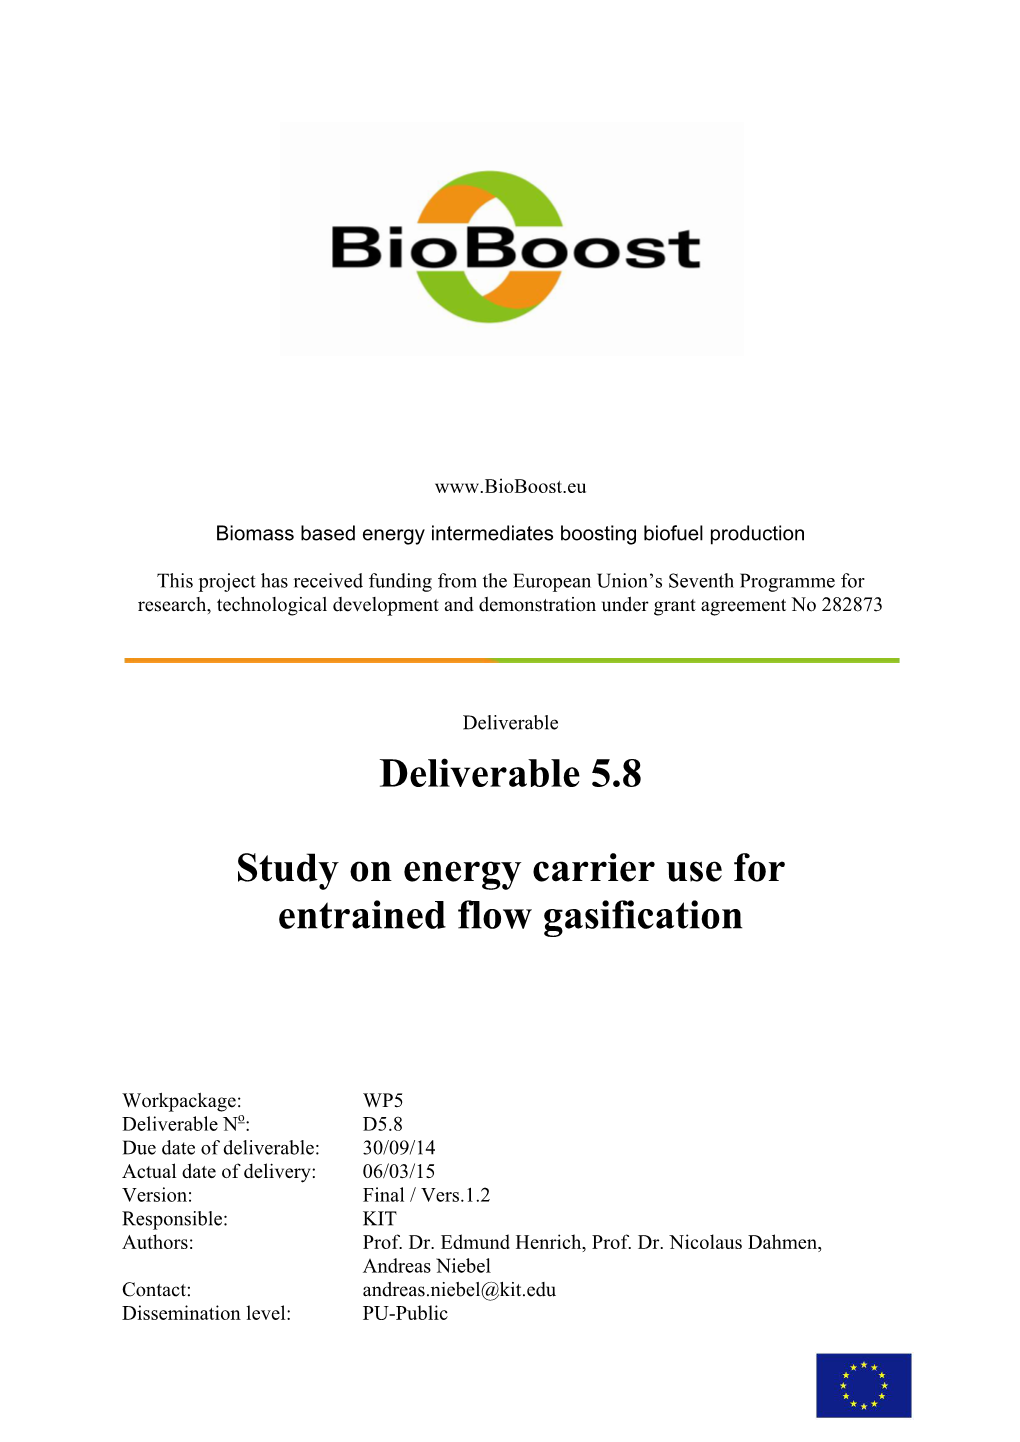 Del 5.8 Study on Energy Carrier Use for Entrained Flow Gasification